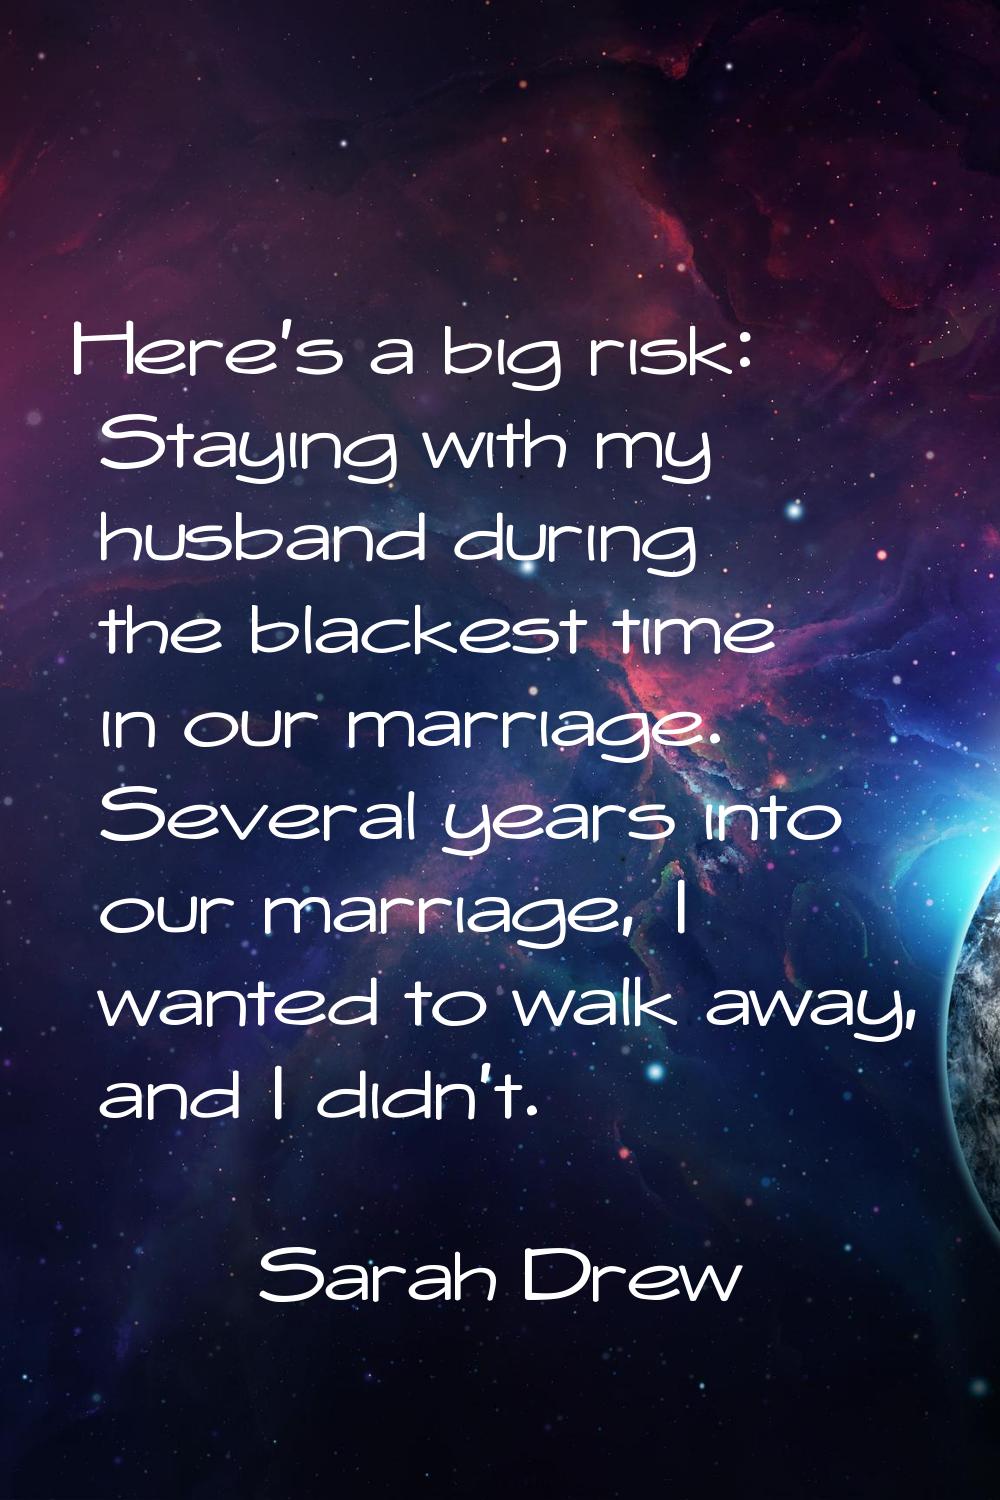 Here's a big risk: Staying with my husband during the blackest time in our marriage. Several years 